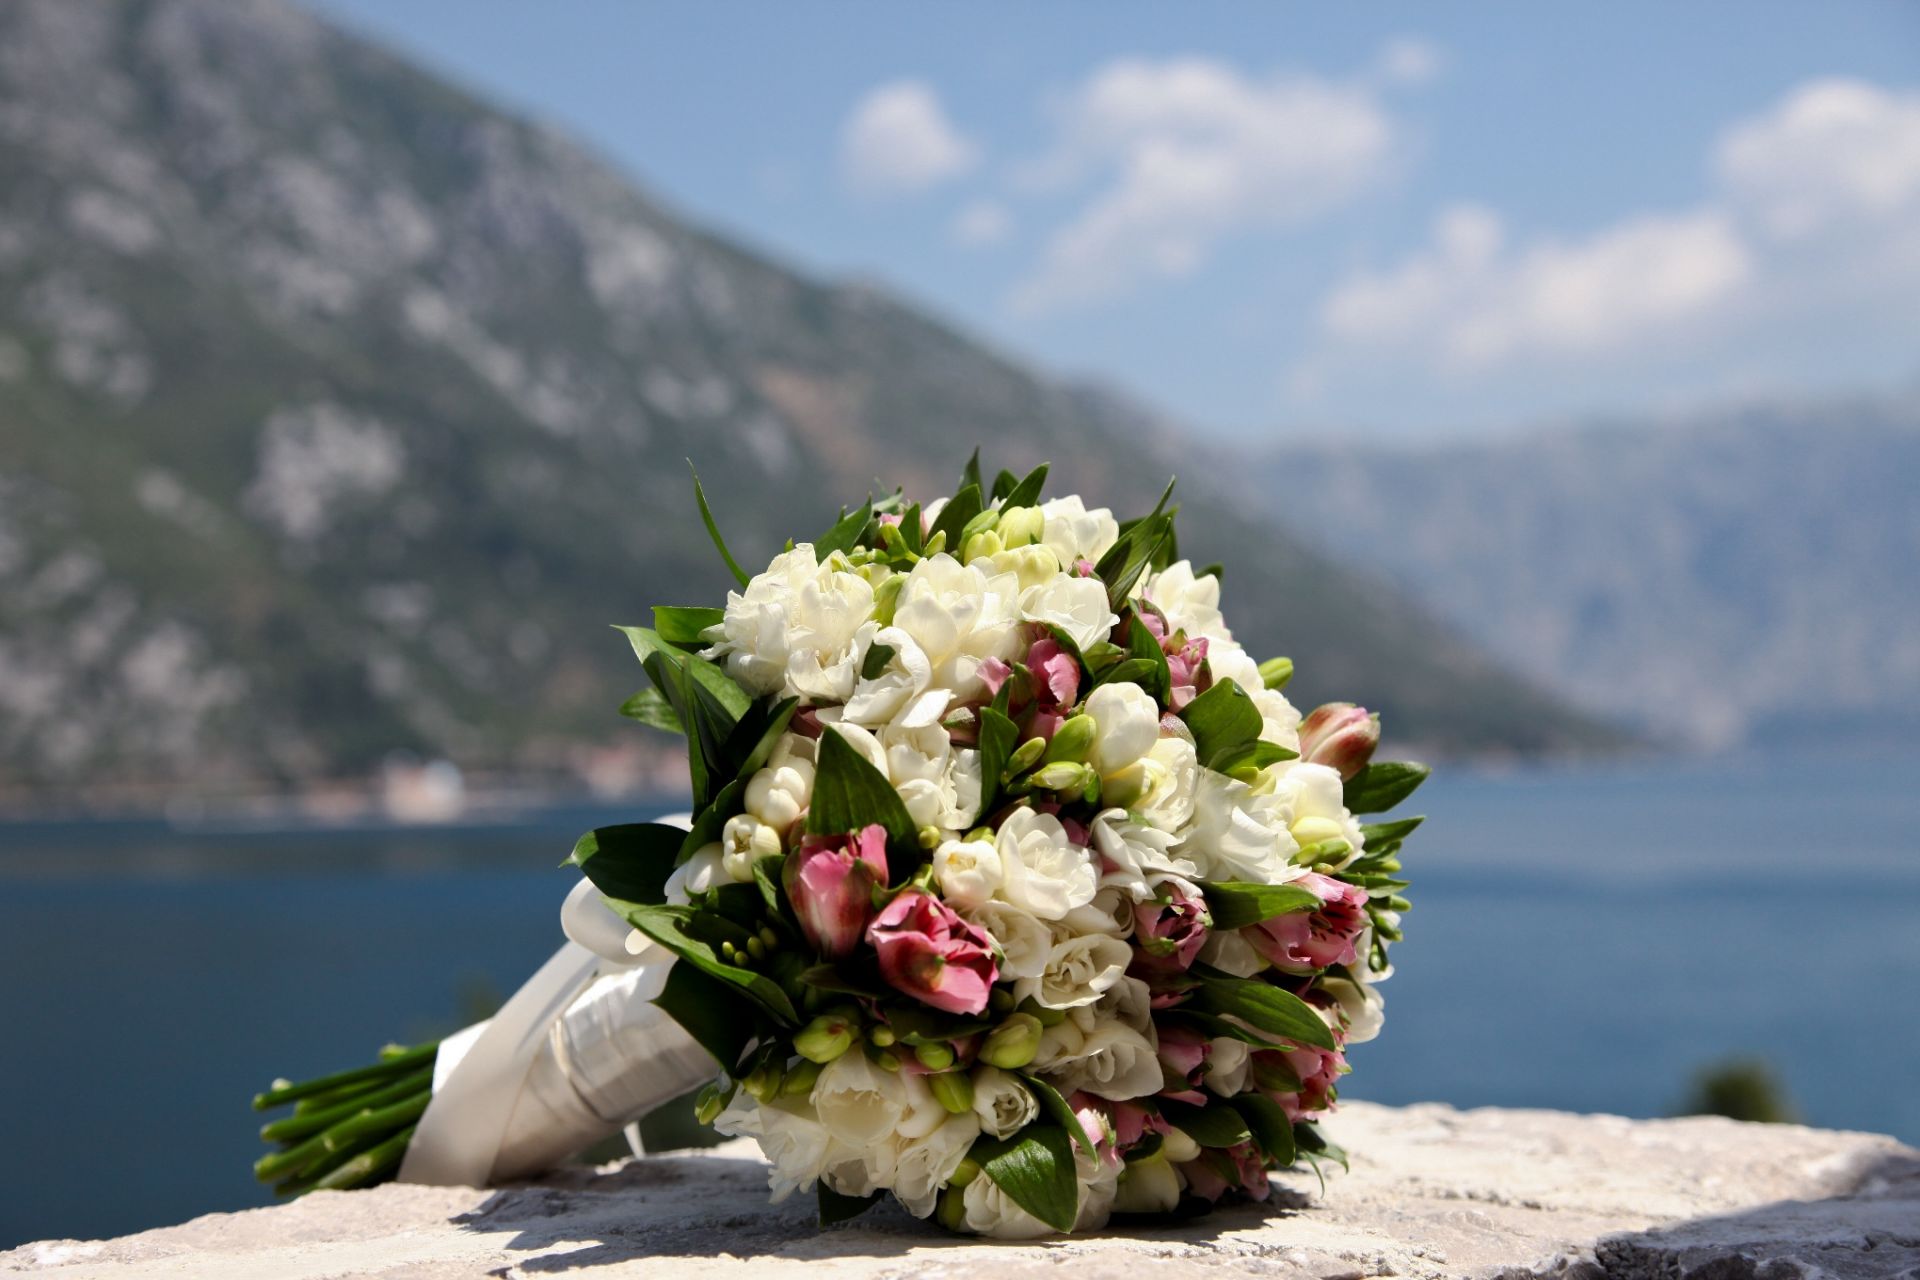 Enjoy in picturesque scenery of Boka Bay and autehntic style of the resort made with love and Montenegrin spirit, designed to blend in its magic surrondings of untouched nature.